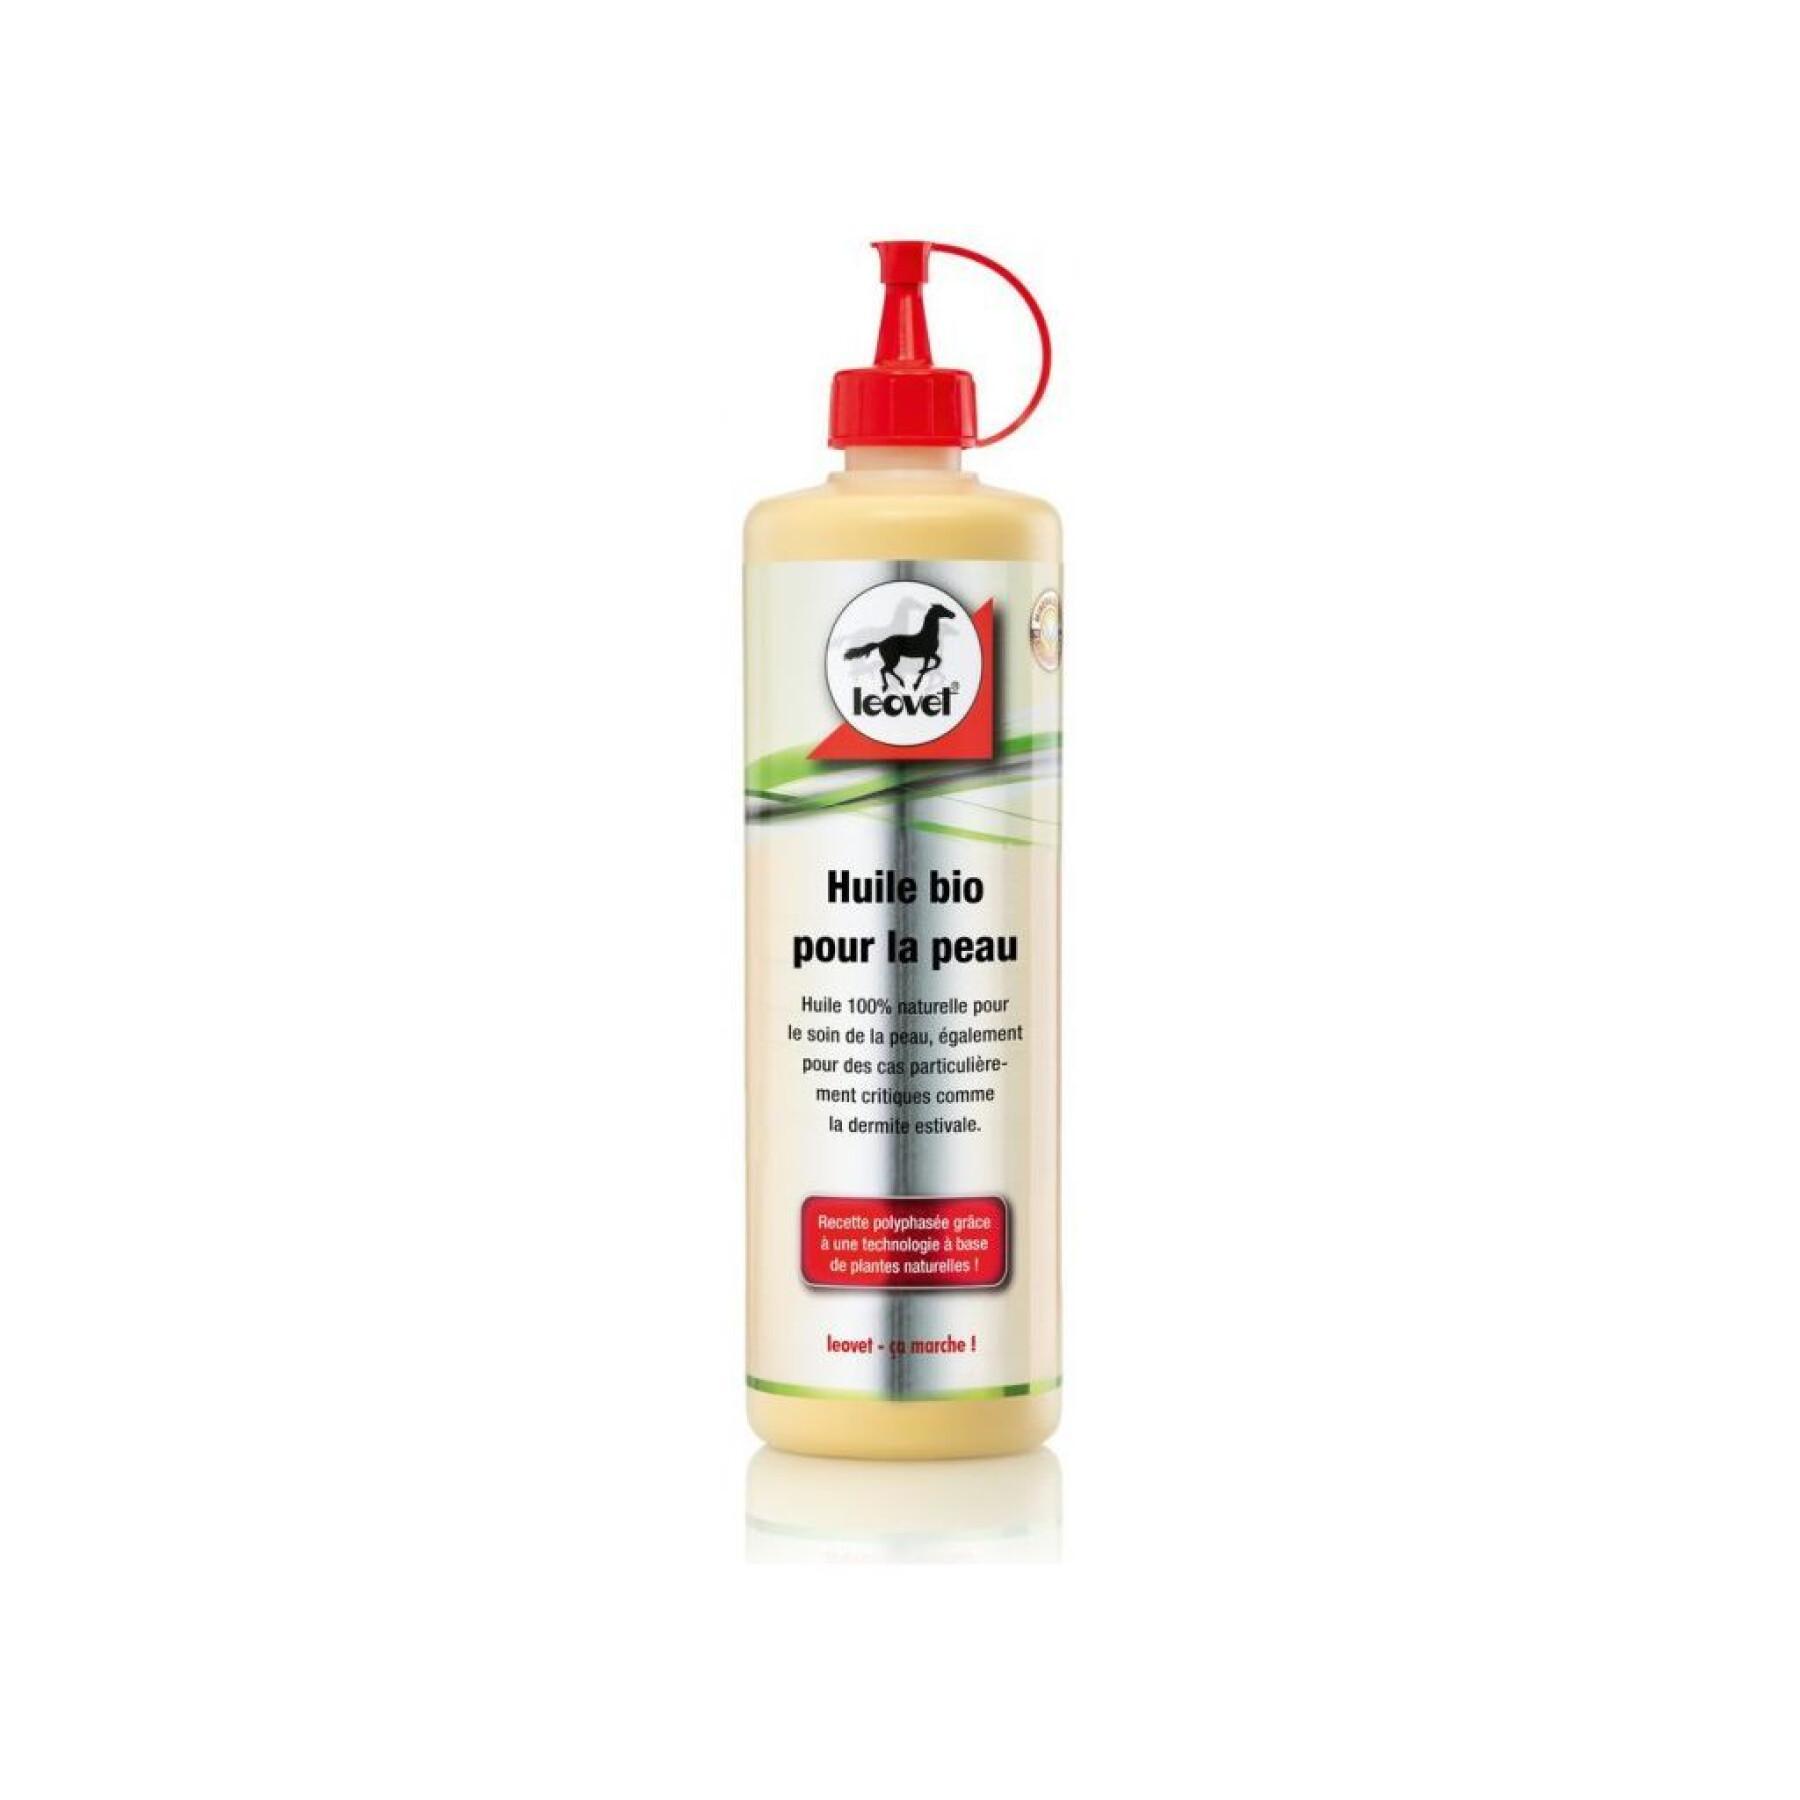 Anti-itching care oil Leovet